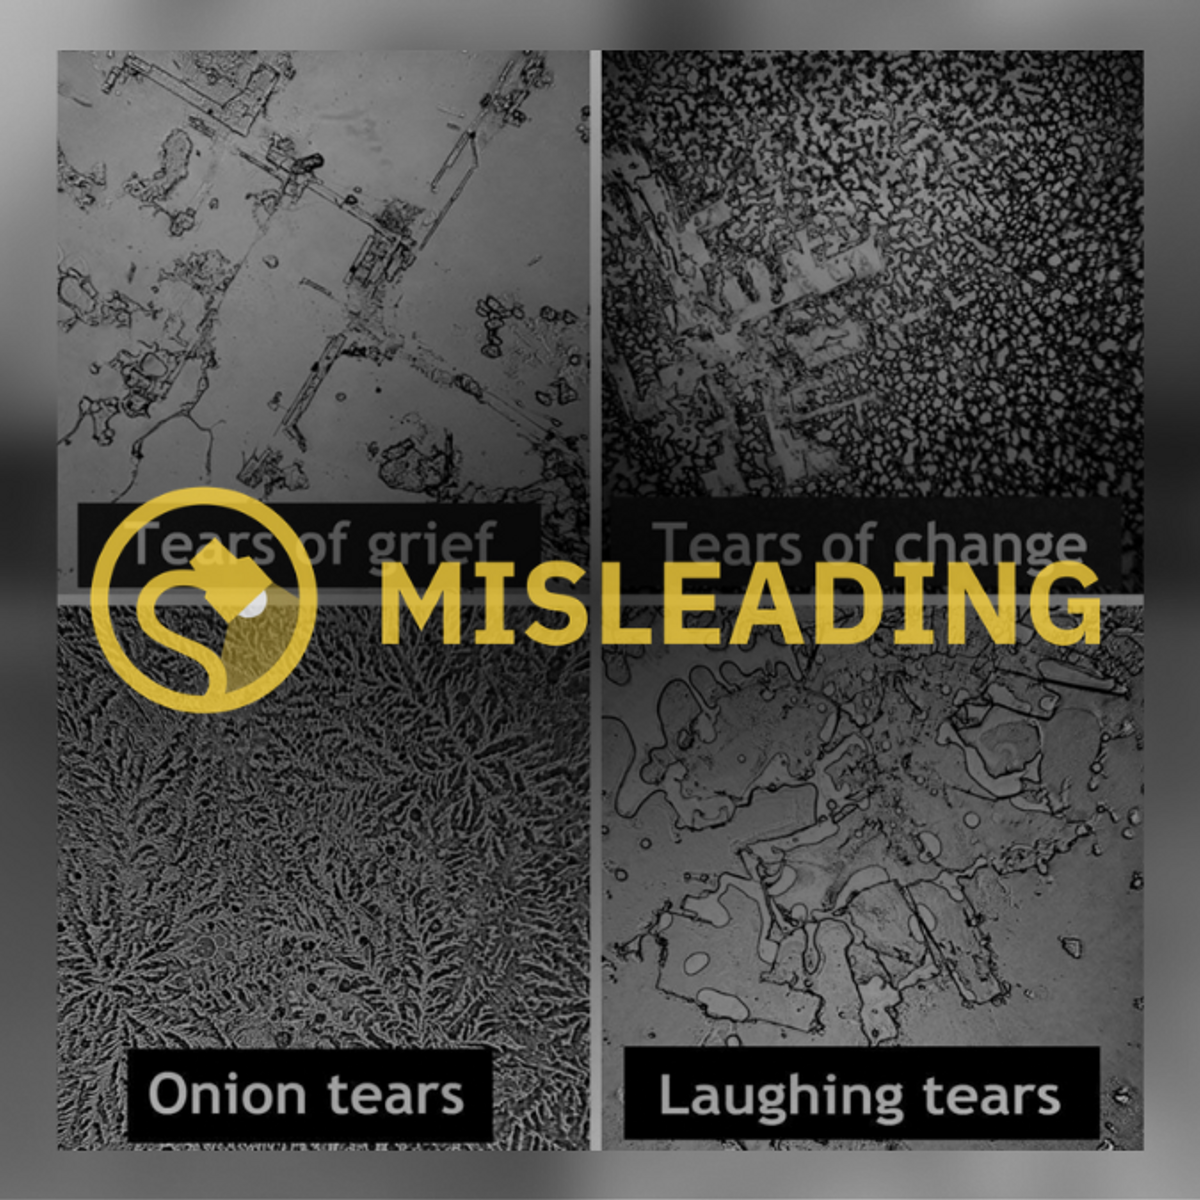 What Are Tears Made Of and Why Do We Cry?​